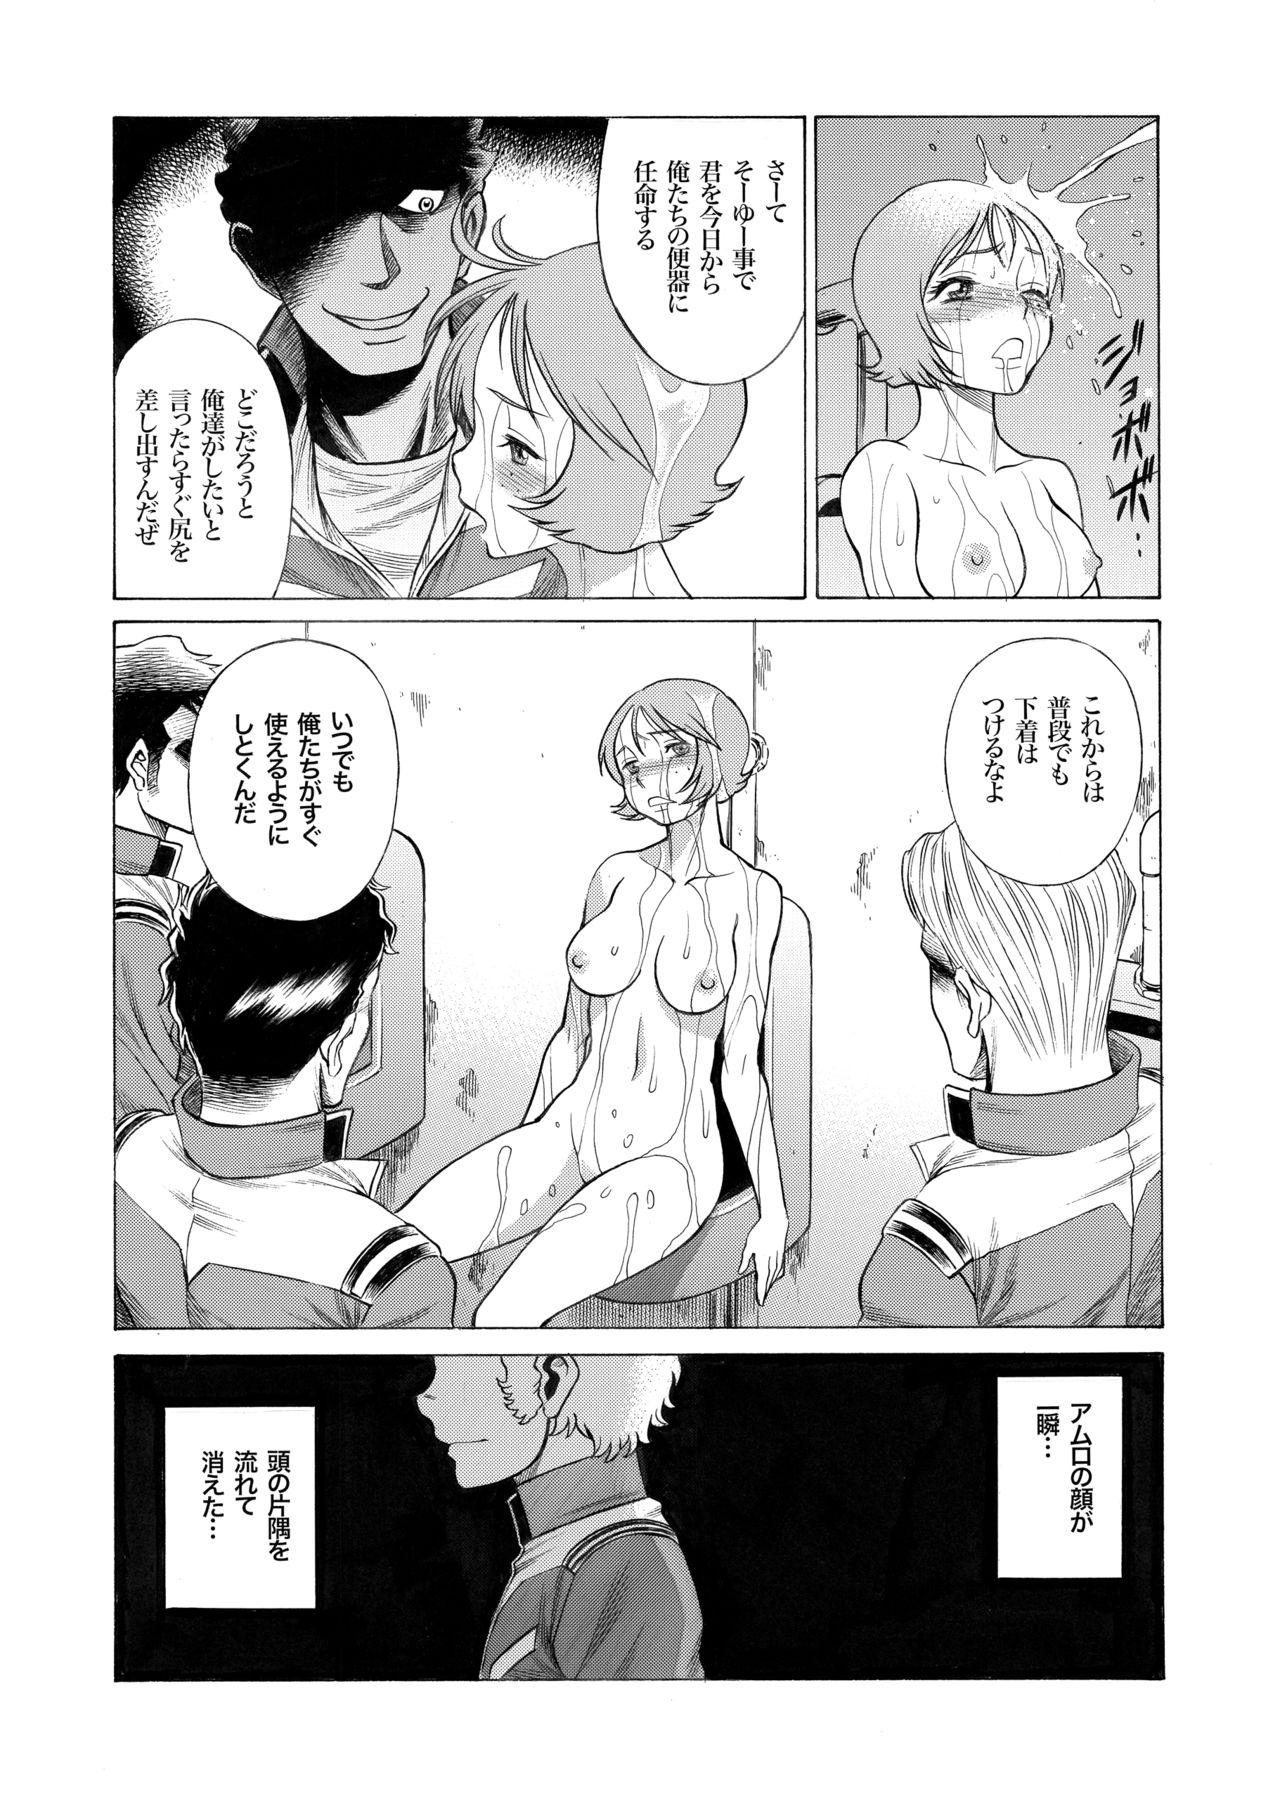 Domina Reijoh - Mobile suit gundam Chibola - Page 7